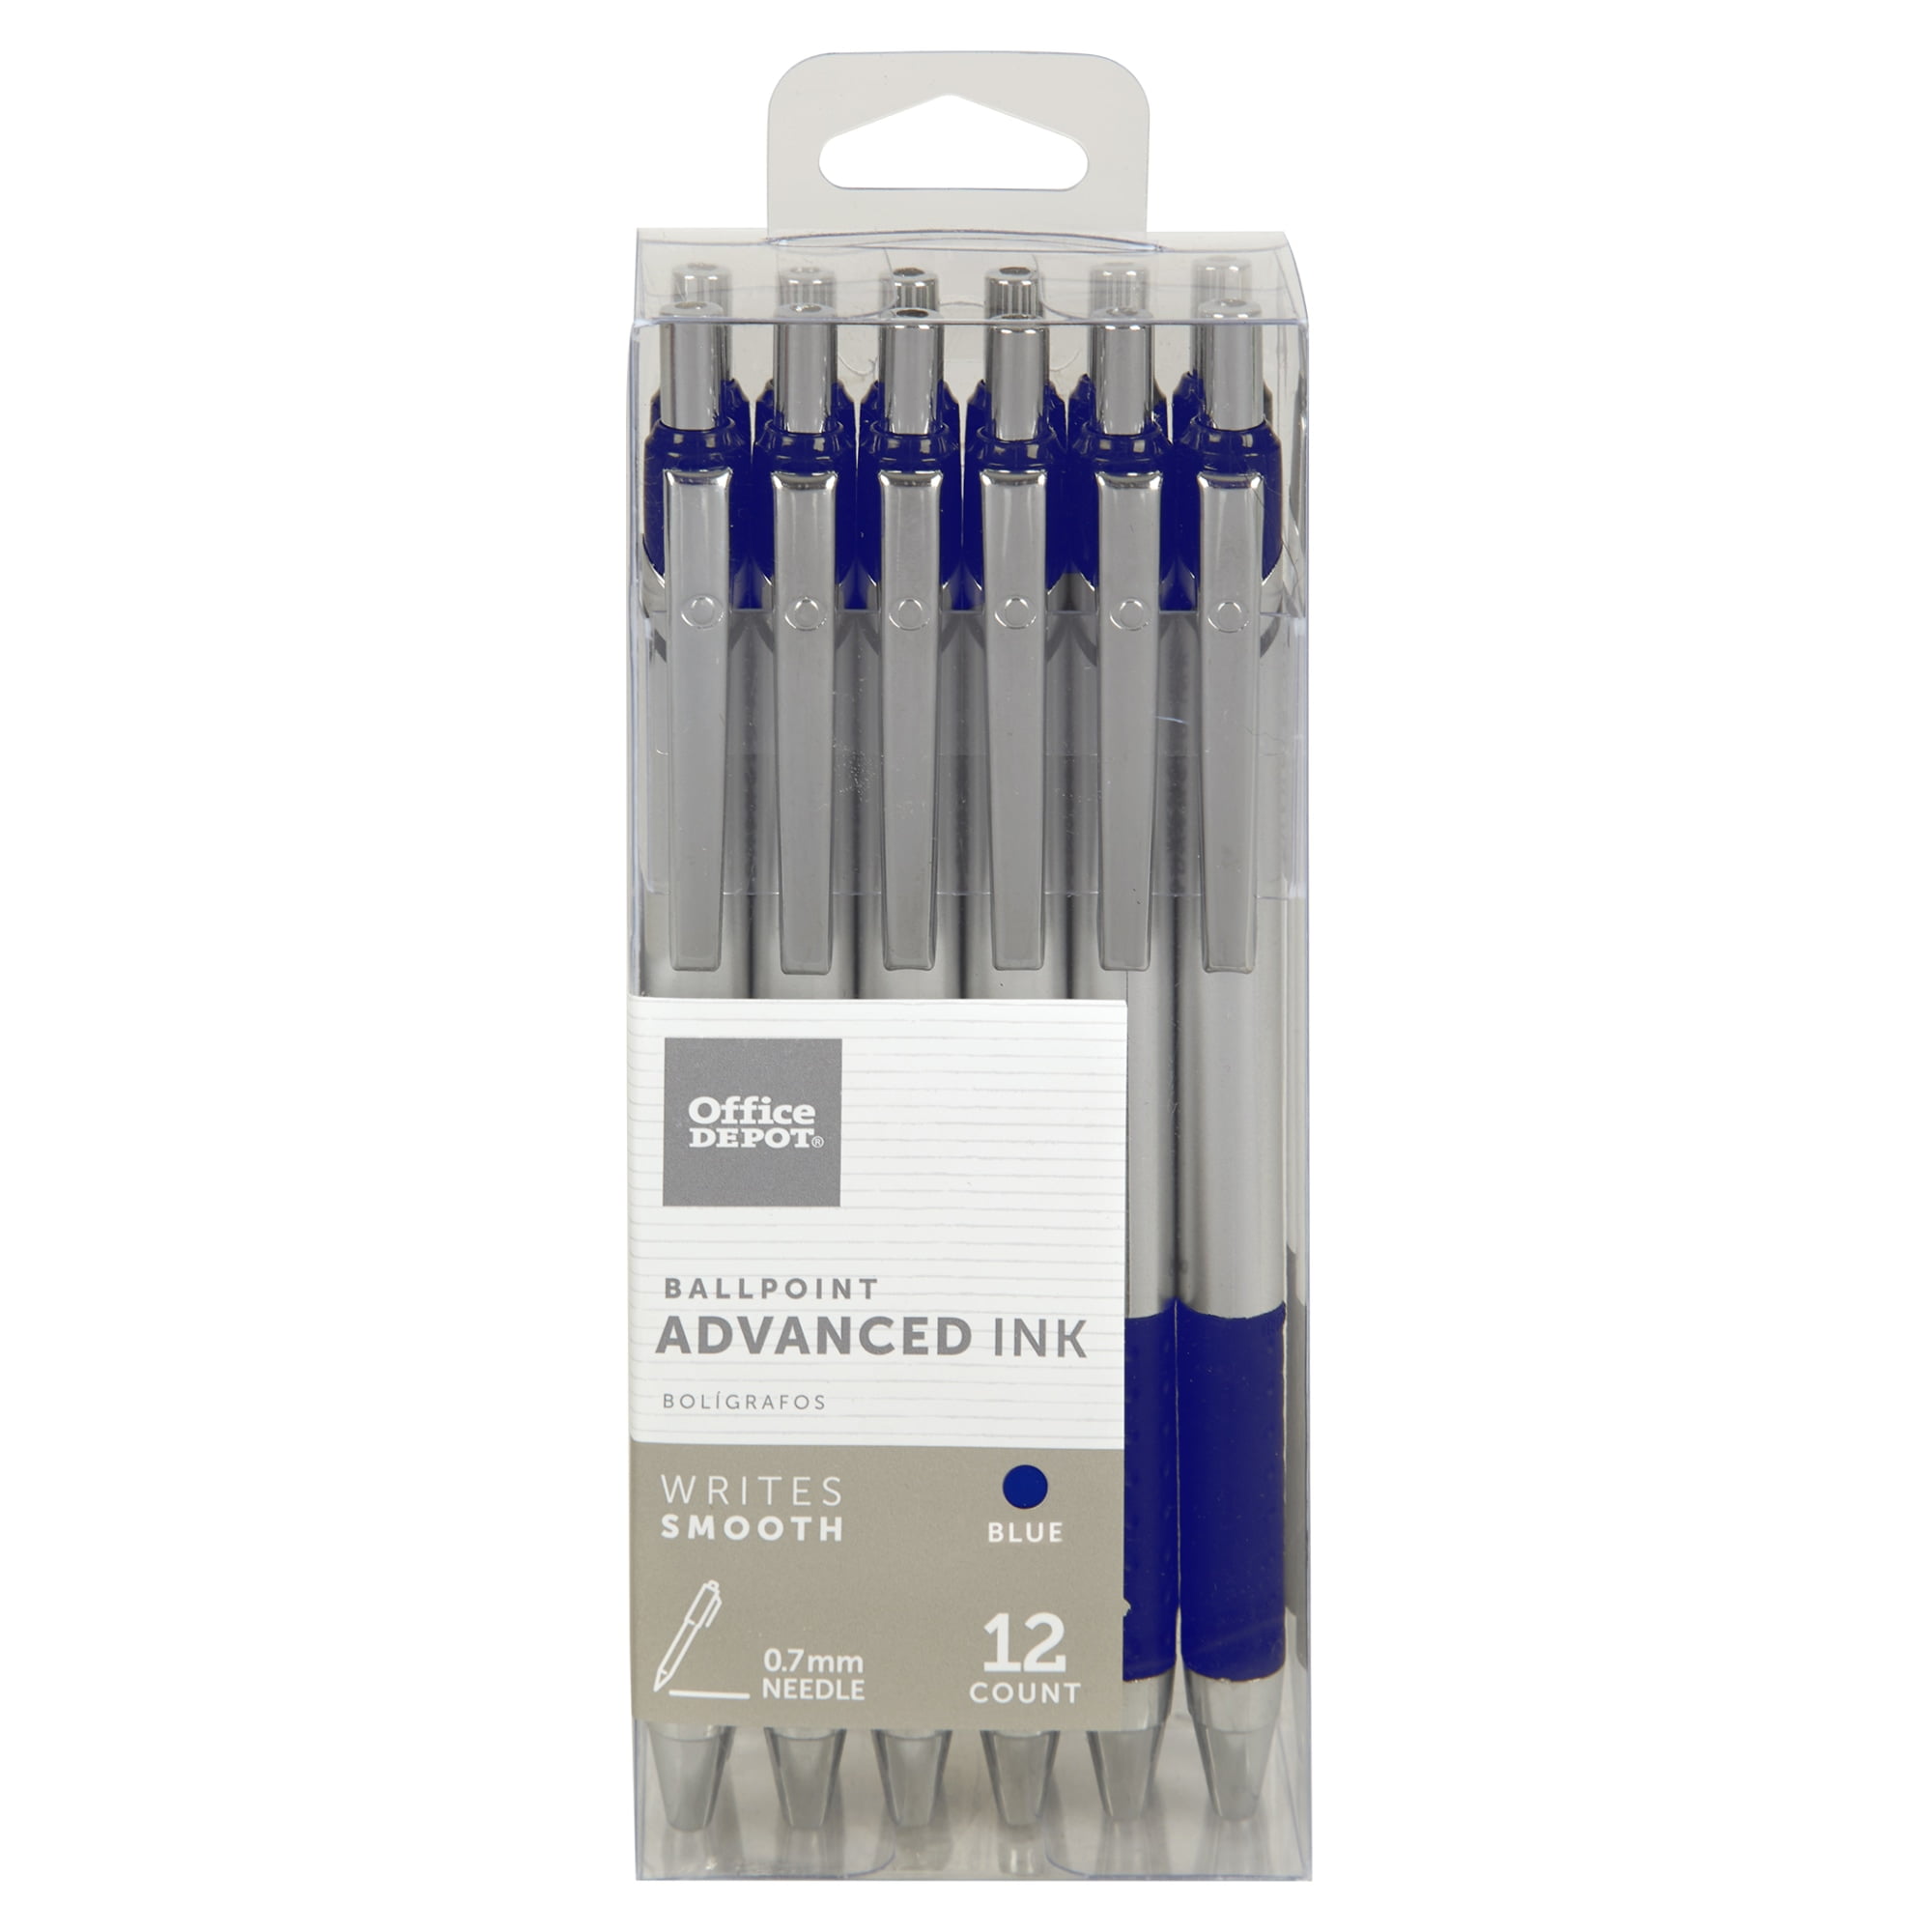 Office Depot Advanced Ink Retractable Ballpoint Pens, Needle Point,  mm,  Silver Barrel, Blue Ink, Pack Of 12 